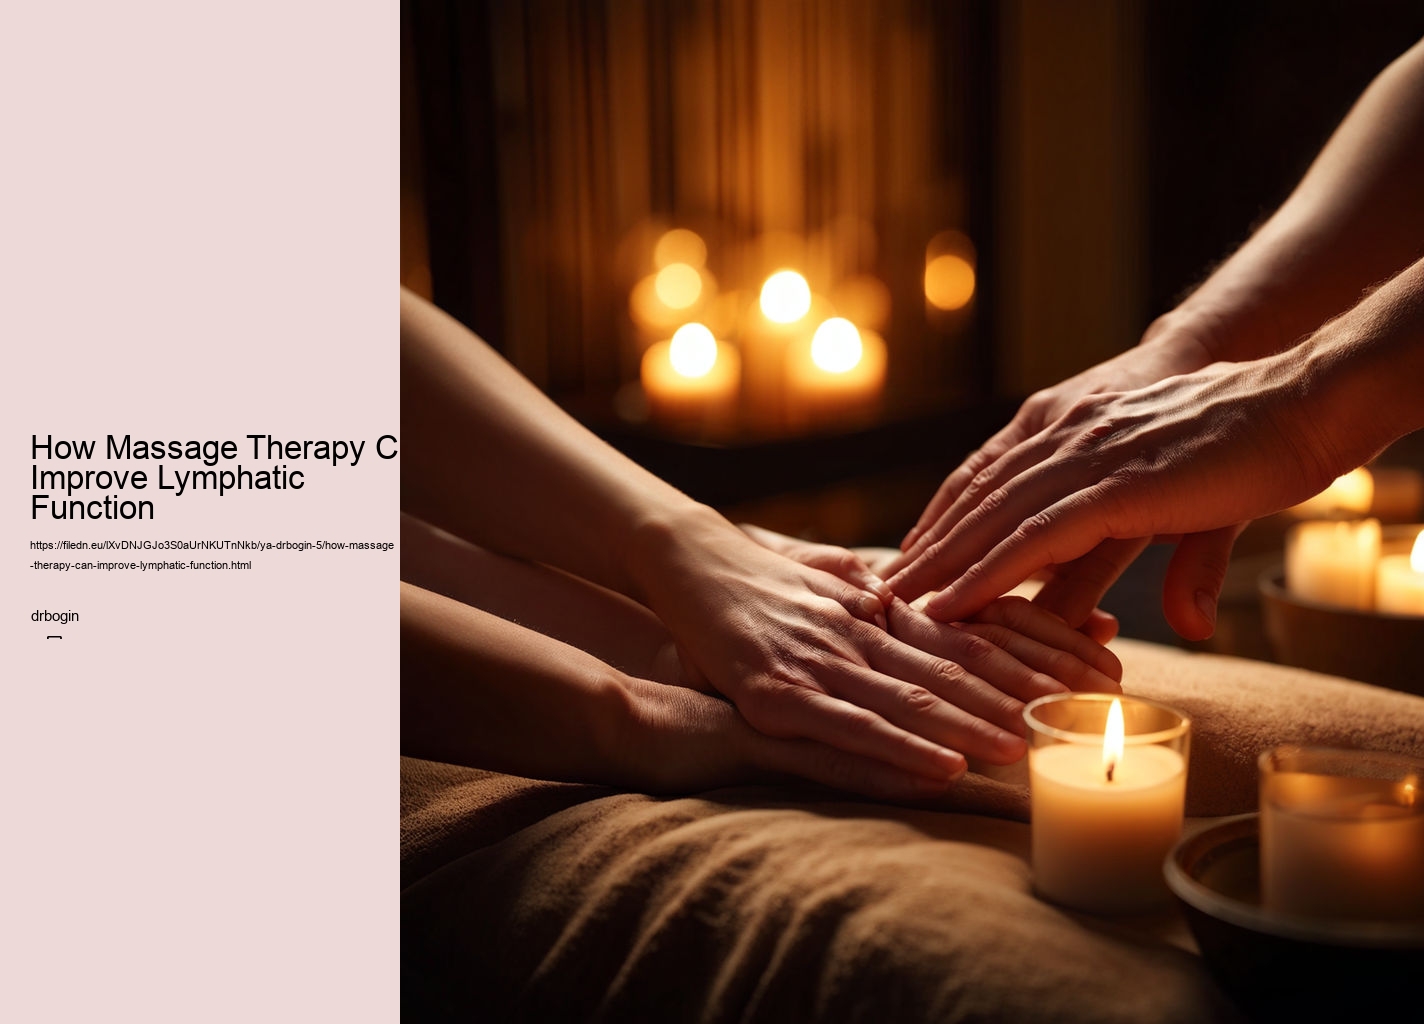 How Massage Therapy Can Improve Lymphatic Function